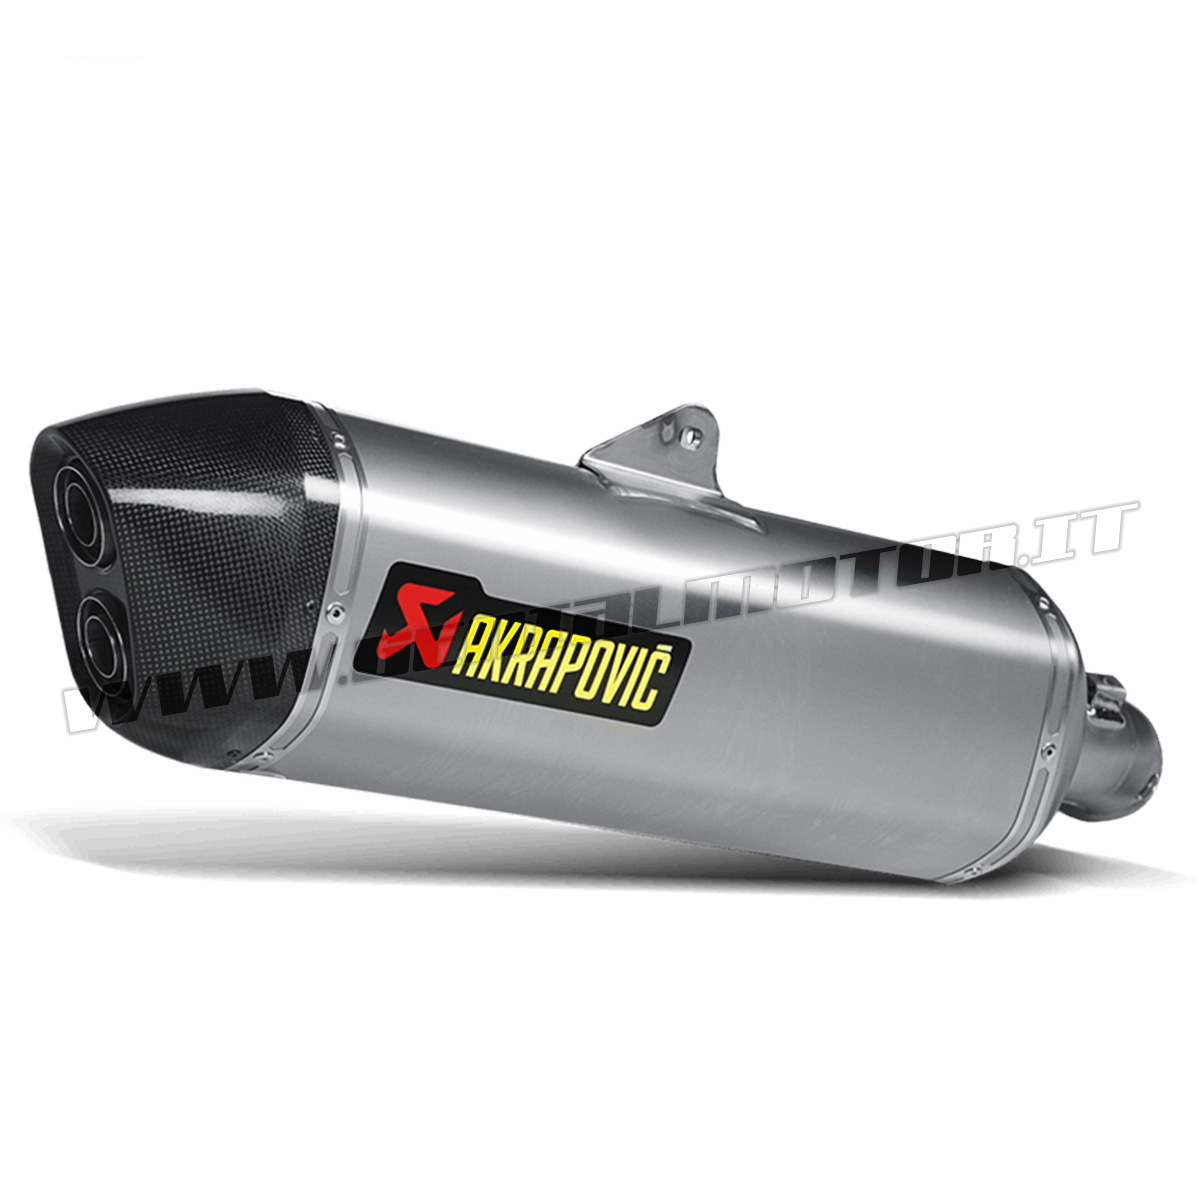 Terminal Discharge Approved Titanium Akrapovic For Bmw K10 Gt 06 08 Ebay